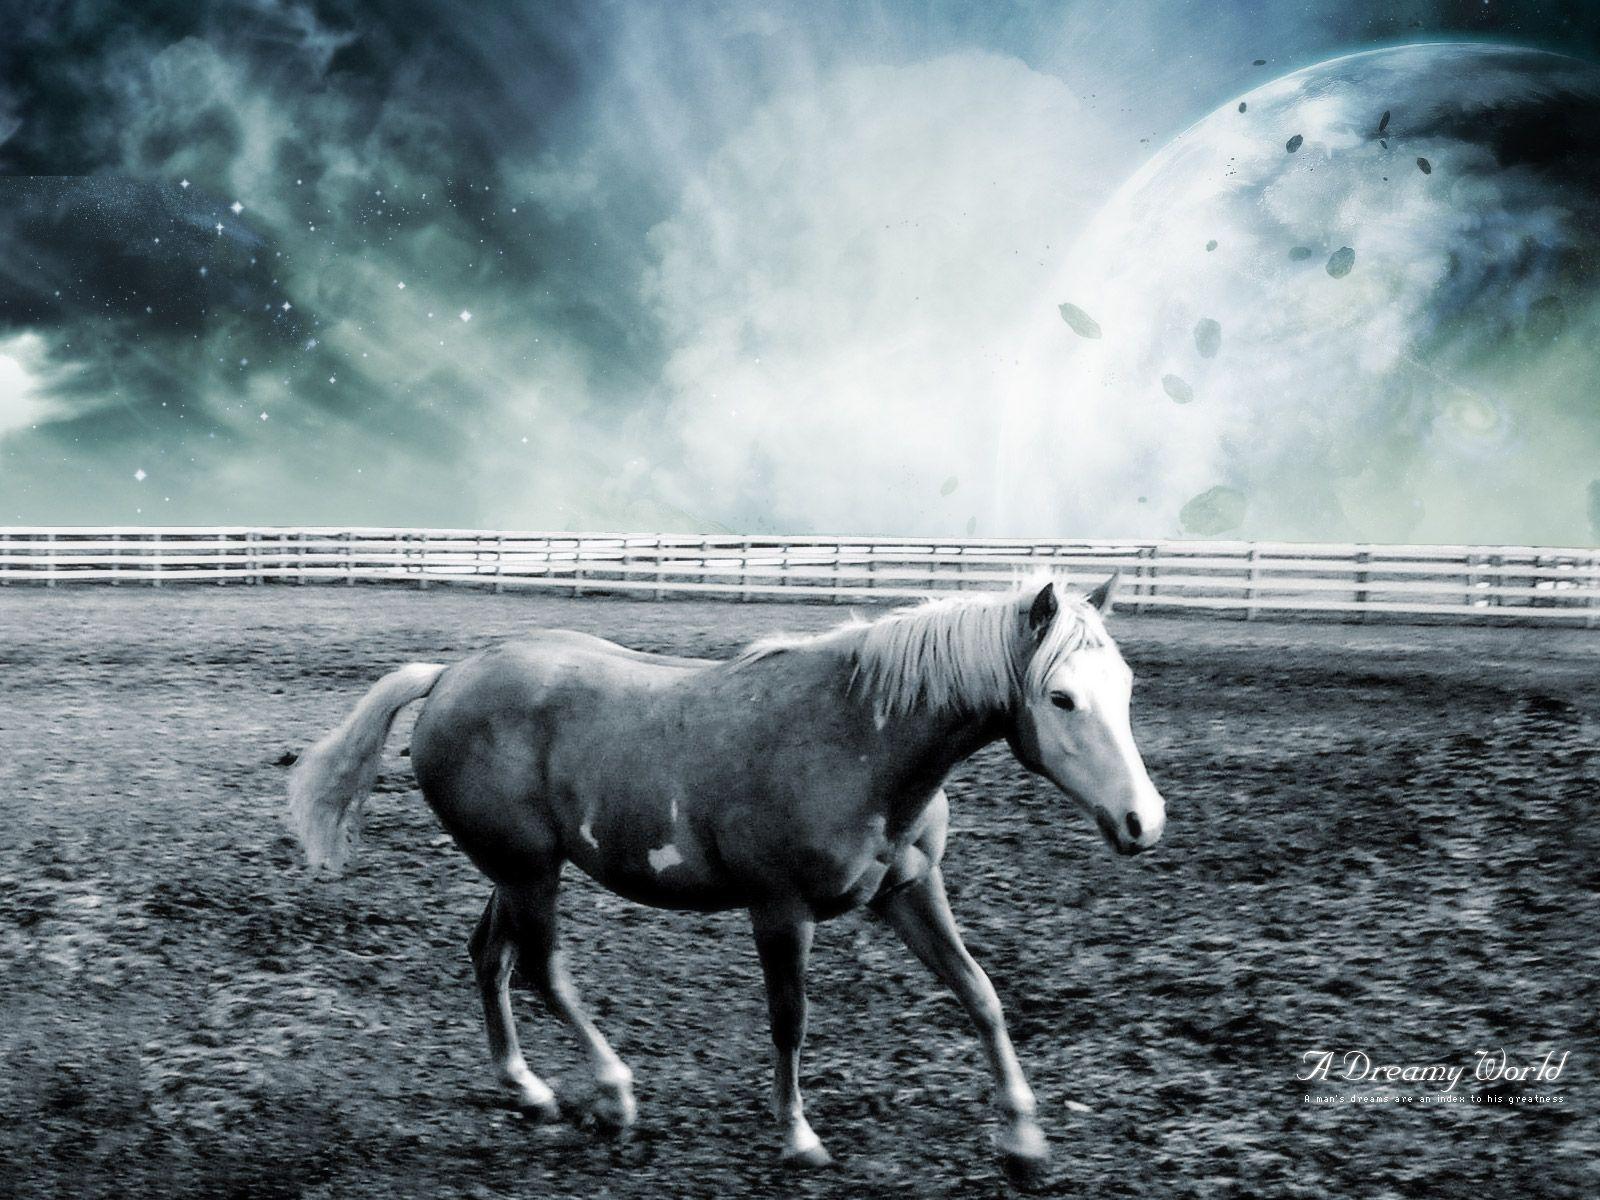 Free Horse Screensavers And Wallpapers Wallpaper Cave